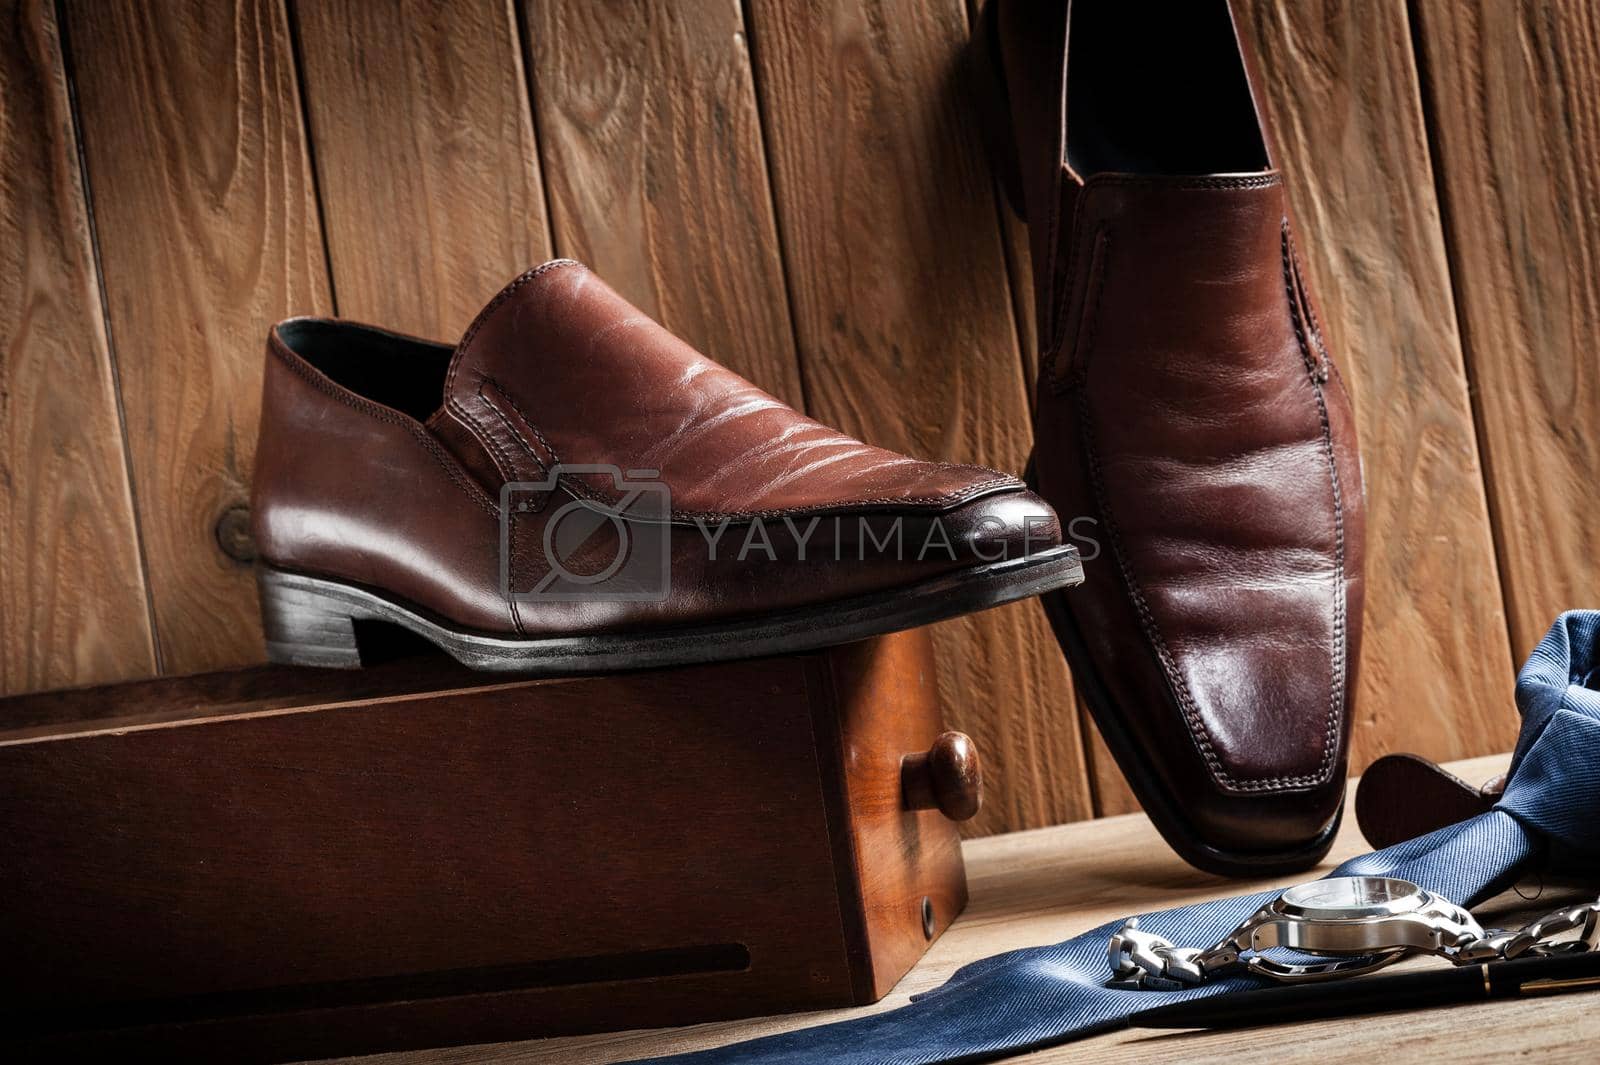 Royalty free image of luxury leather shoes by norgal